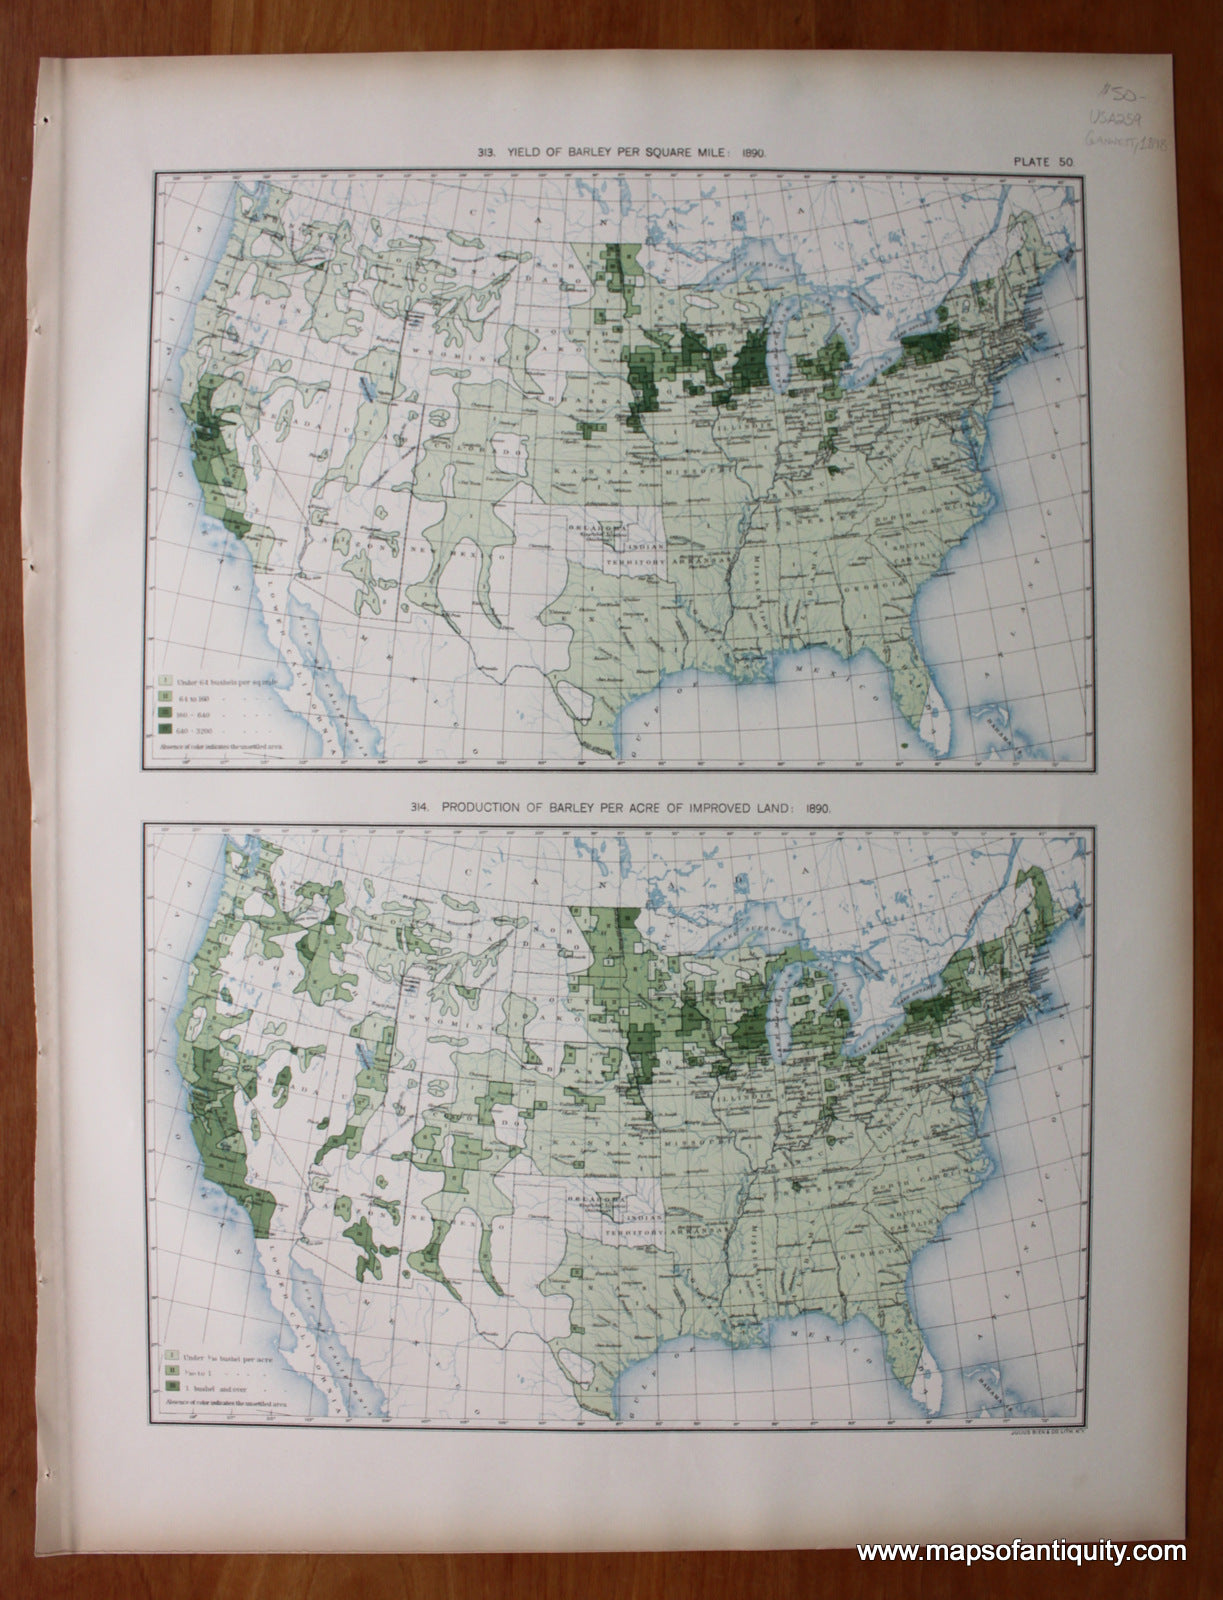 Antique-Printed-Color-Map-Yield-of-Barley-Per-Square-Mile:-1890/-Production-of-Barley-Per-Acre-of-Improved-Land:-1890-United-States-United-States-General-1898-Gannett-Maps-Of-Antiquity